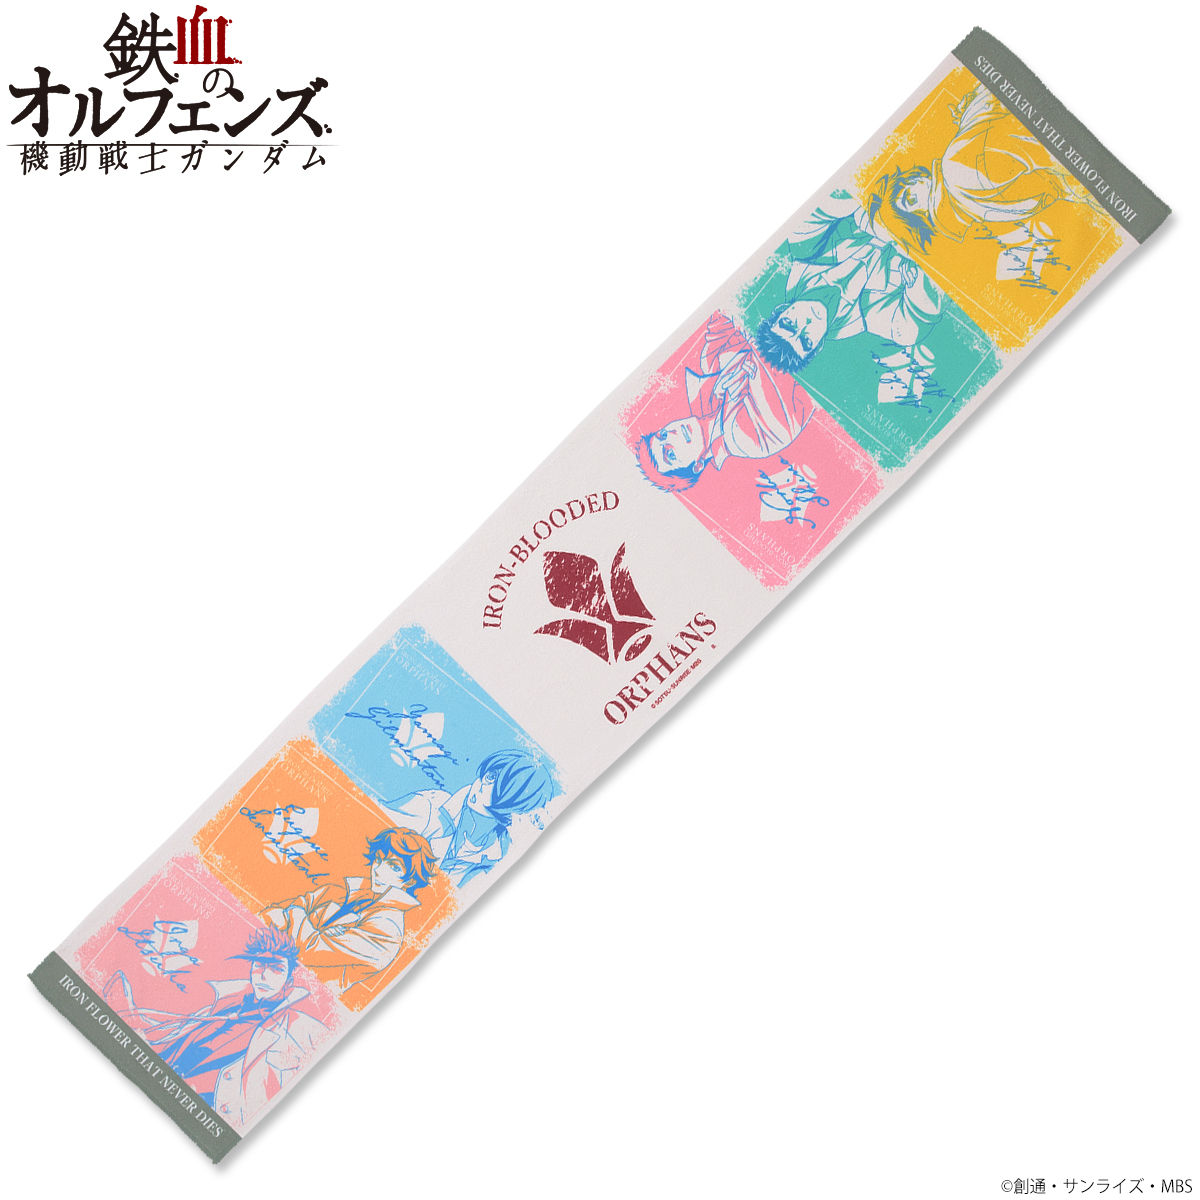 Mobile Suit Gundam: Iron-Blooded Orphans Tricolor-themed Towel